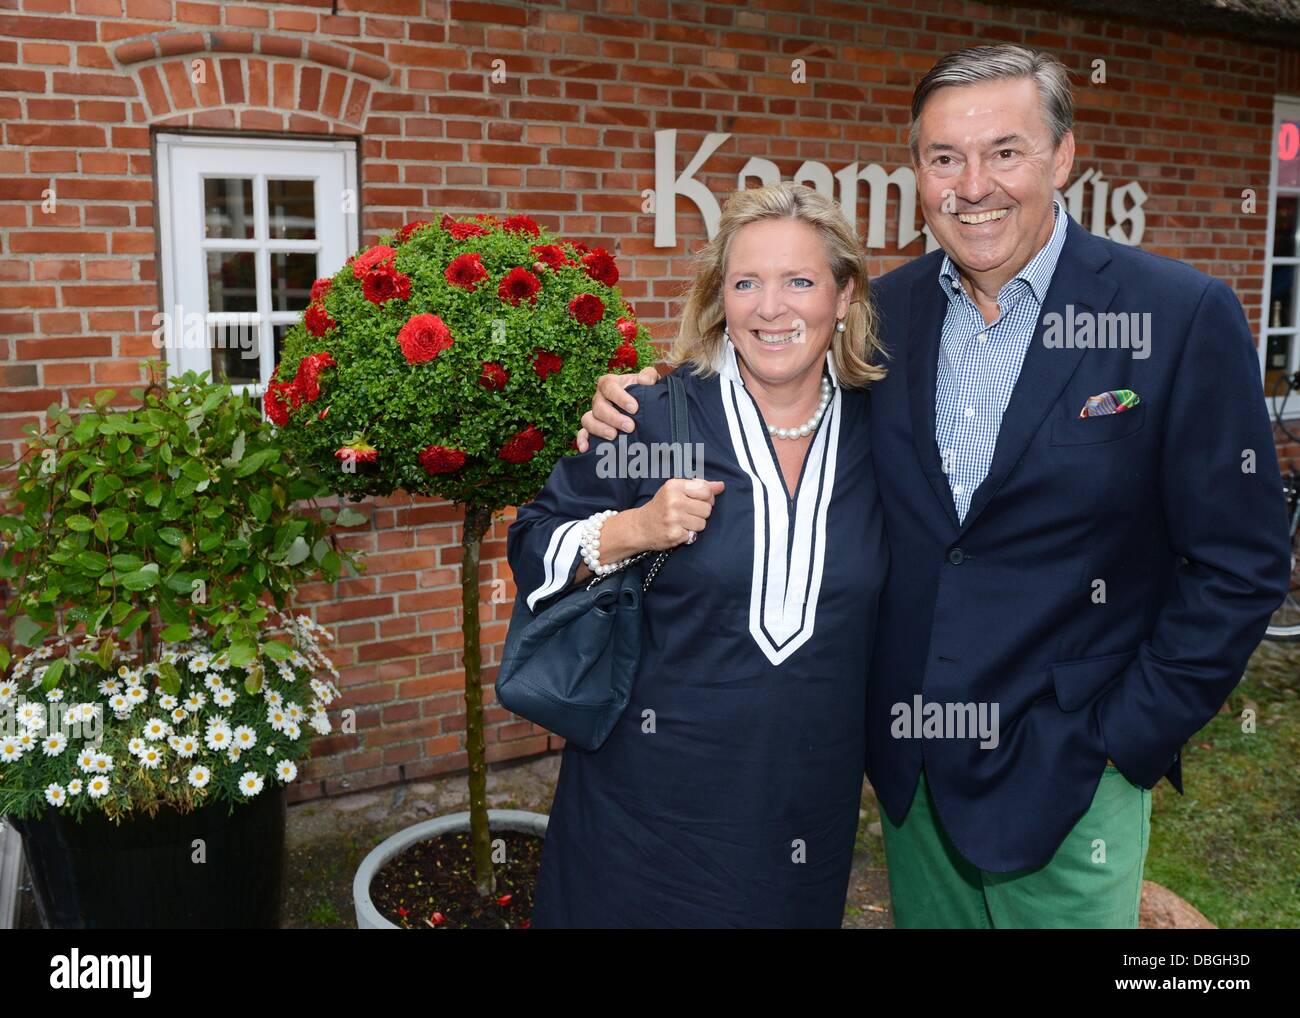 Michael Behrendt from Hapag-Lloyd and his wife Cornelia arrive to the  traditional crab dinner at Kaamp Hues on Sylt island in Kampen, Germany, 27  July 2013. Photo: JENS KALAENE Stock Photo - Alamy